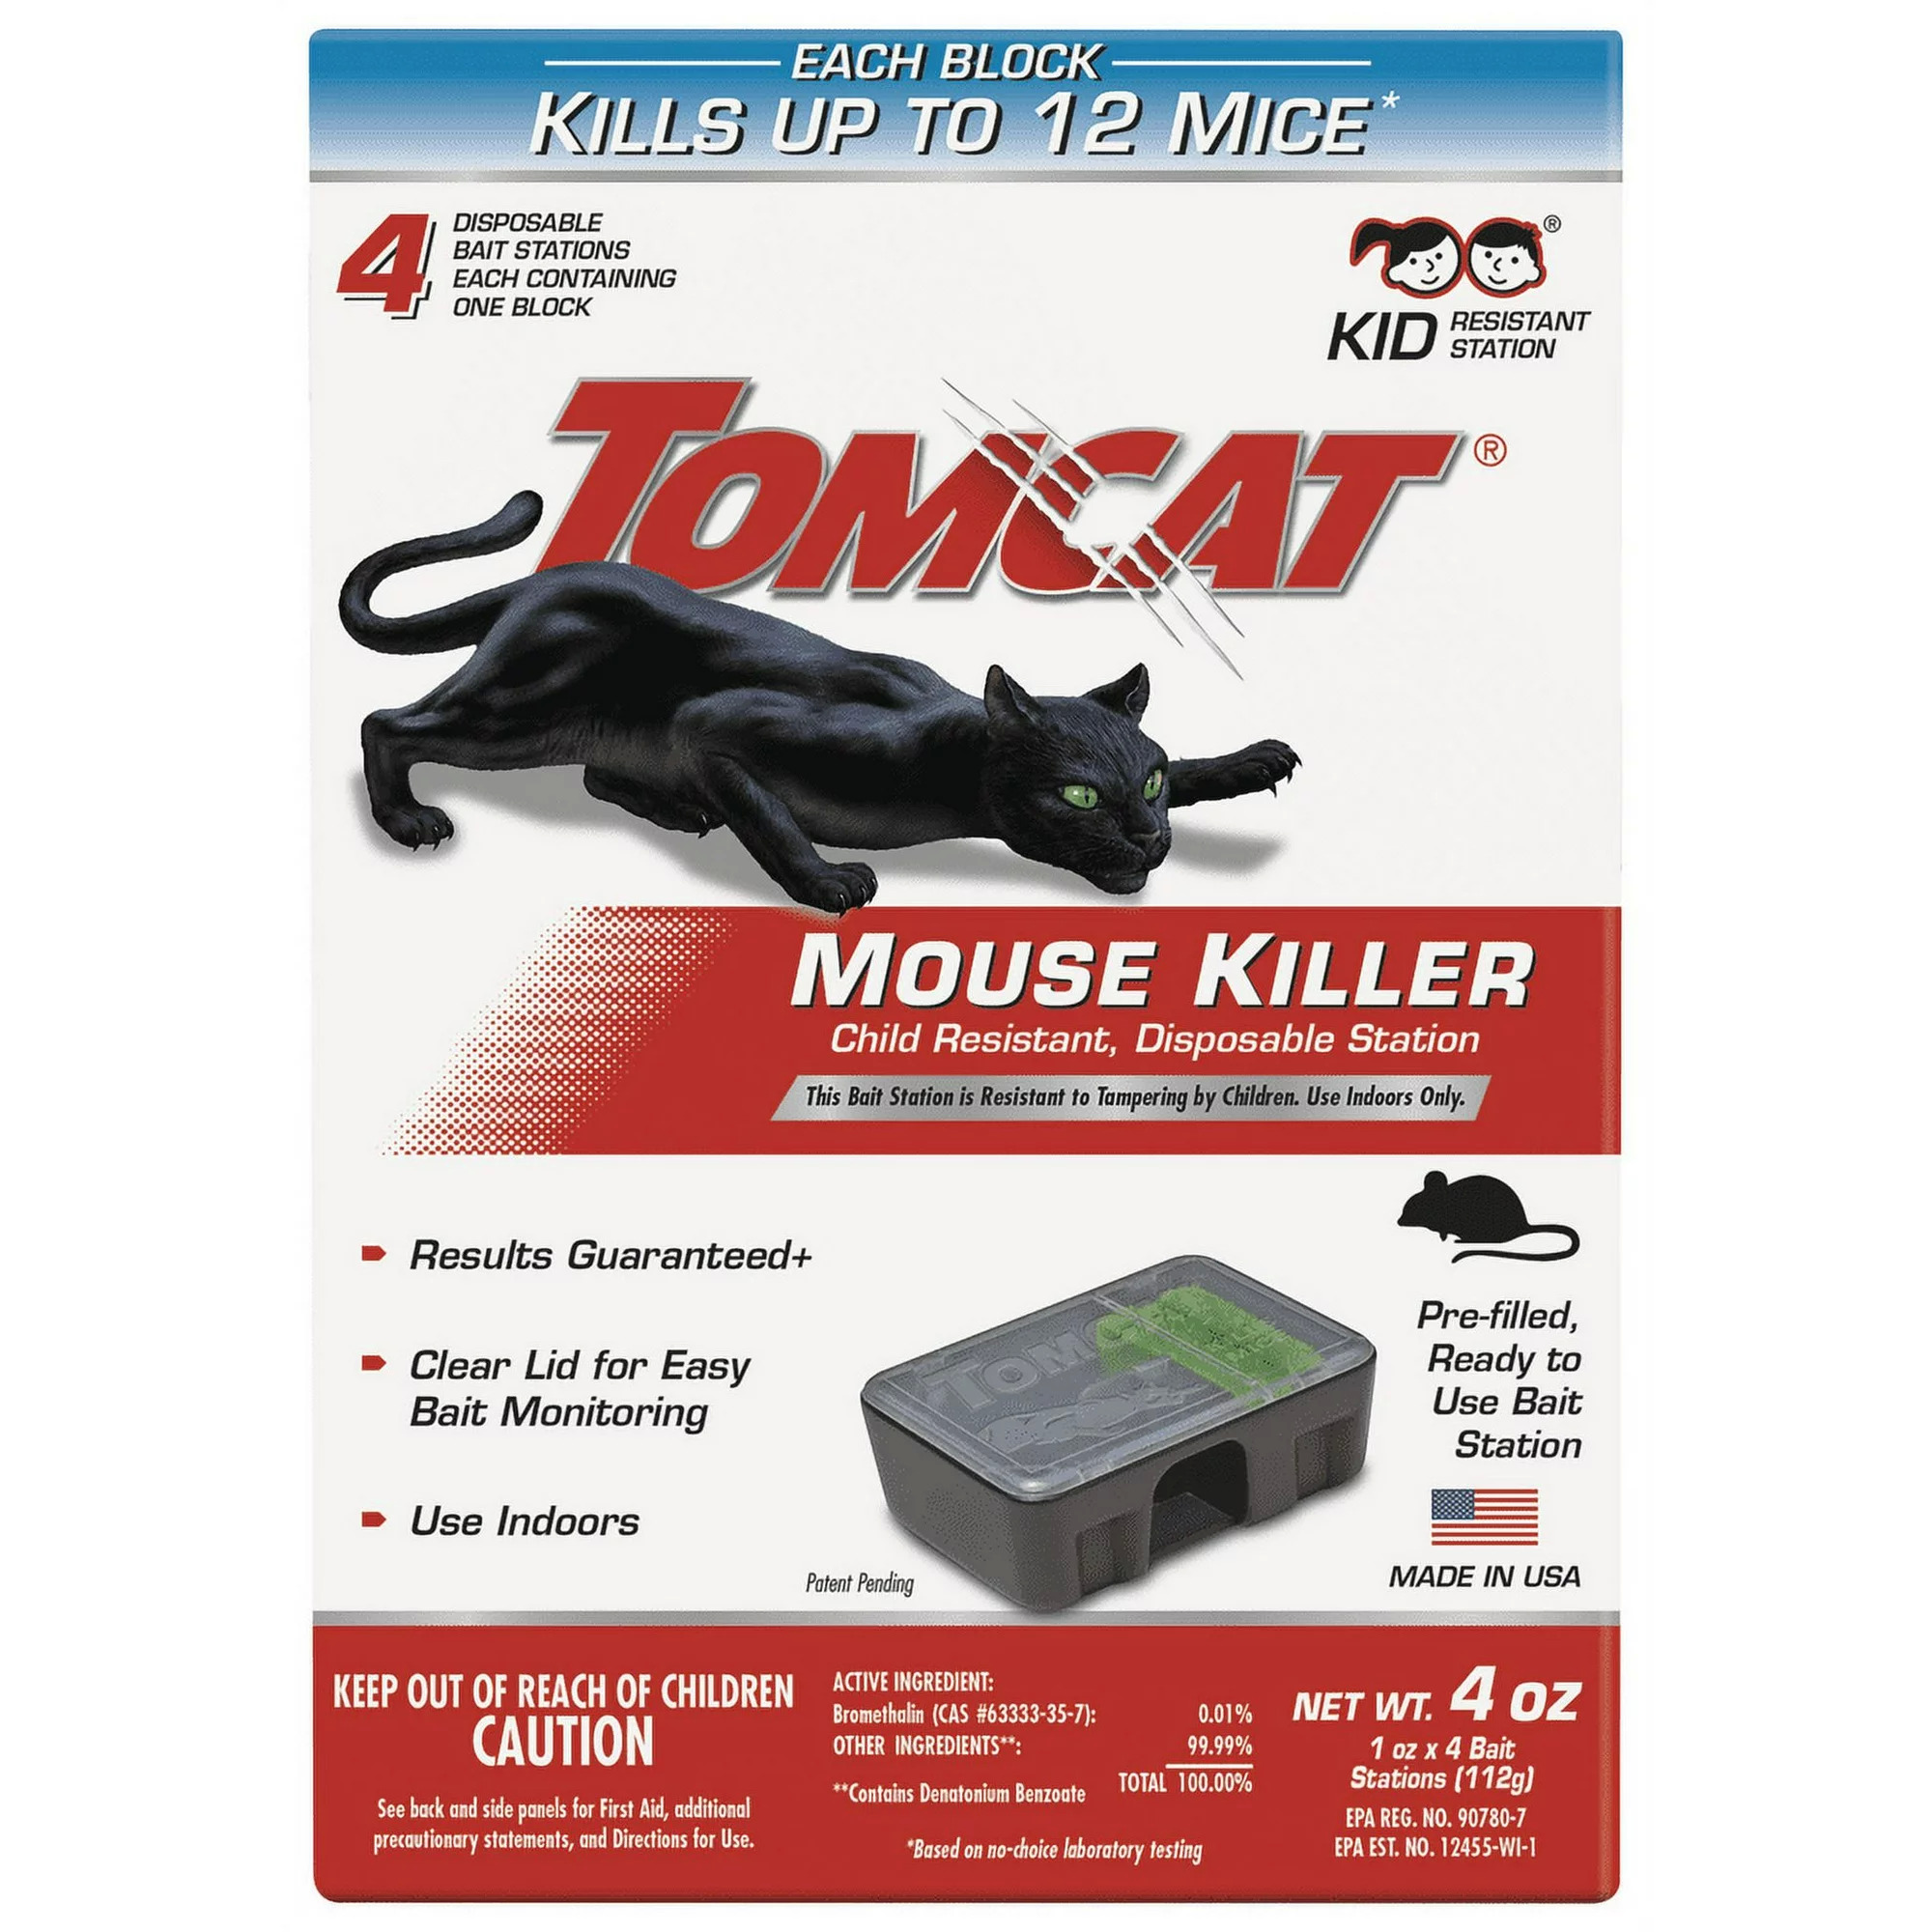 Tomcat Mouse Killer Child Resistant Disposable Station 4 Pre-Filled Ready-To-Use Bait Stations $5.38 Free Shipping w/Walmart+